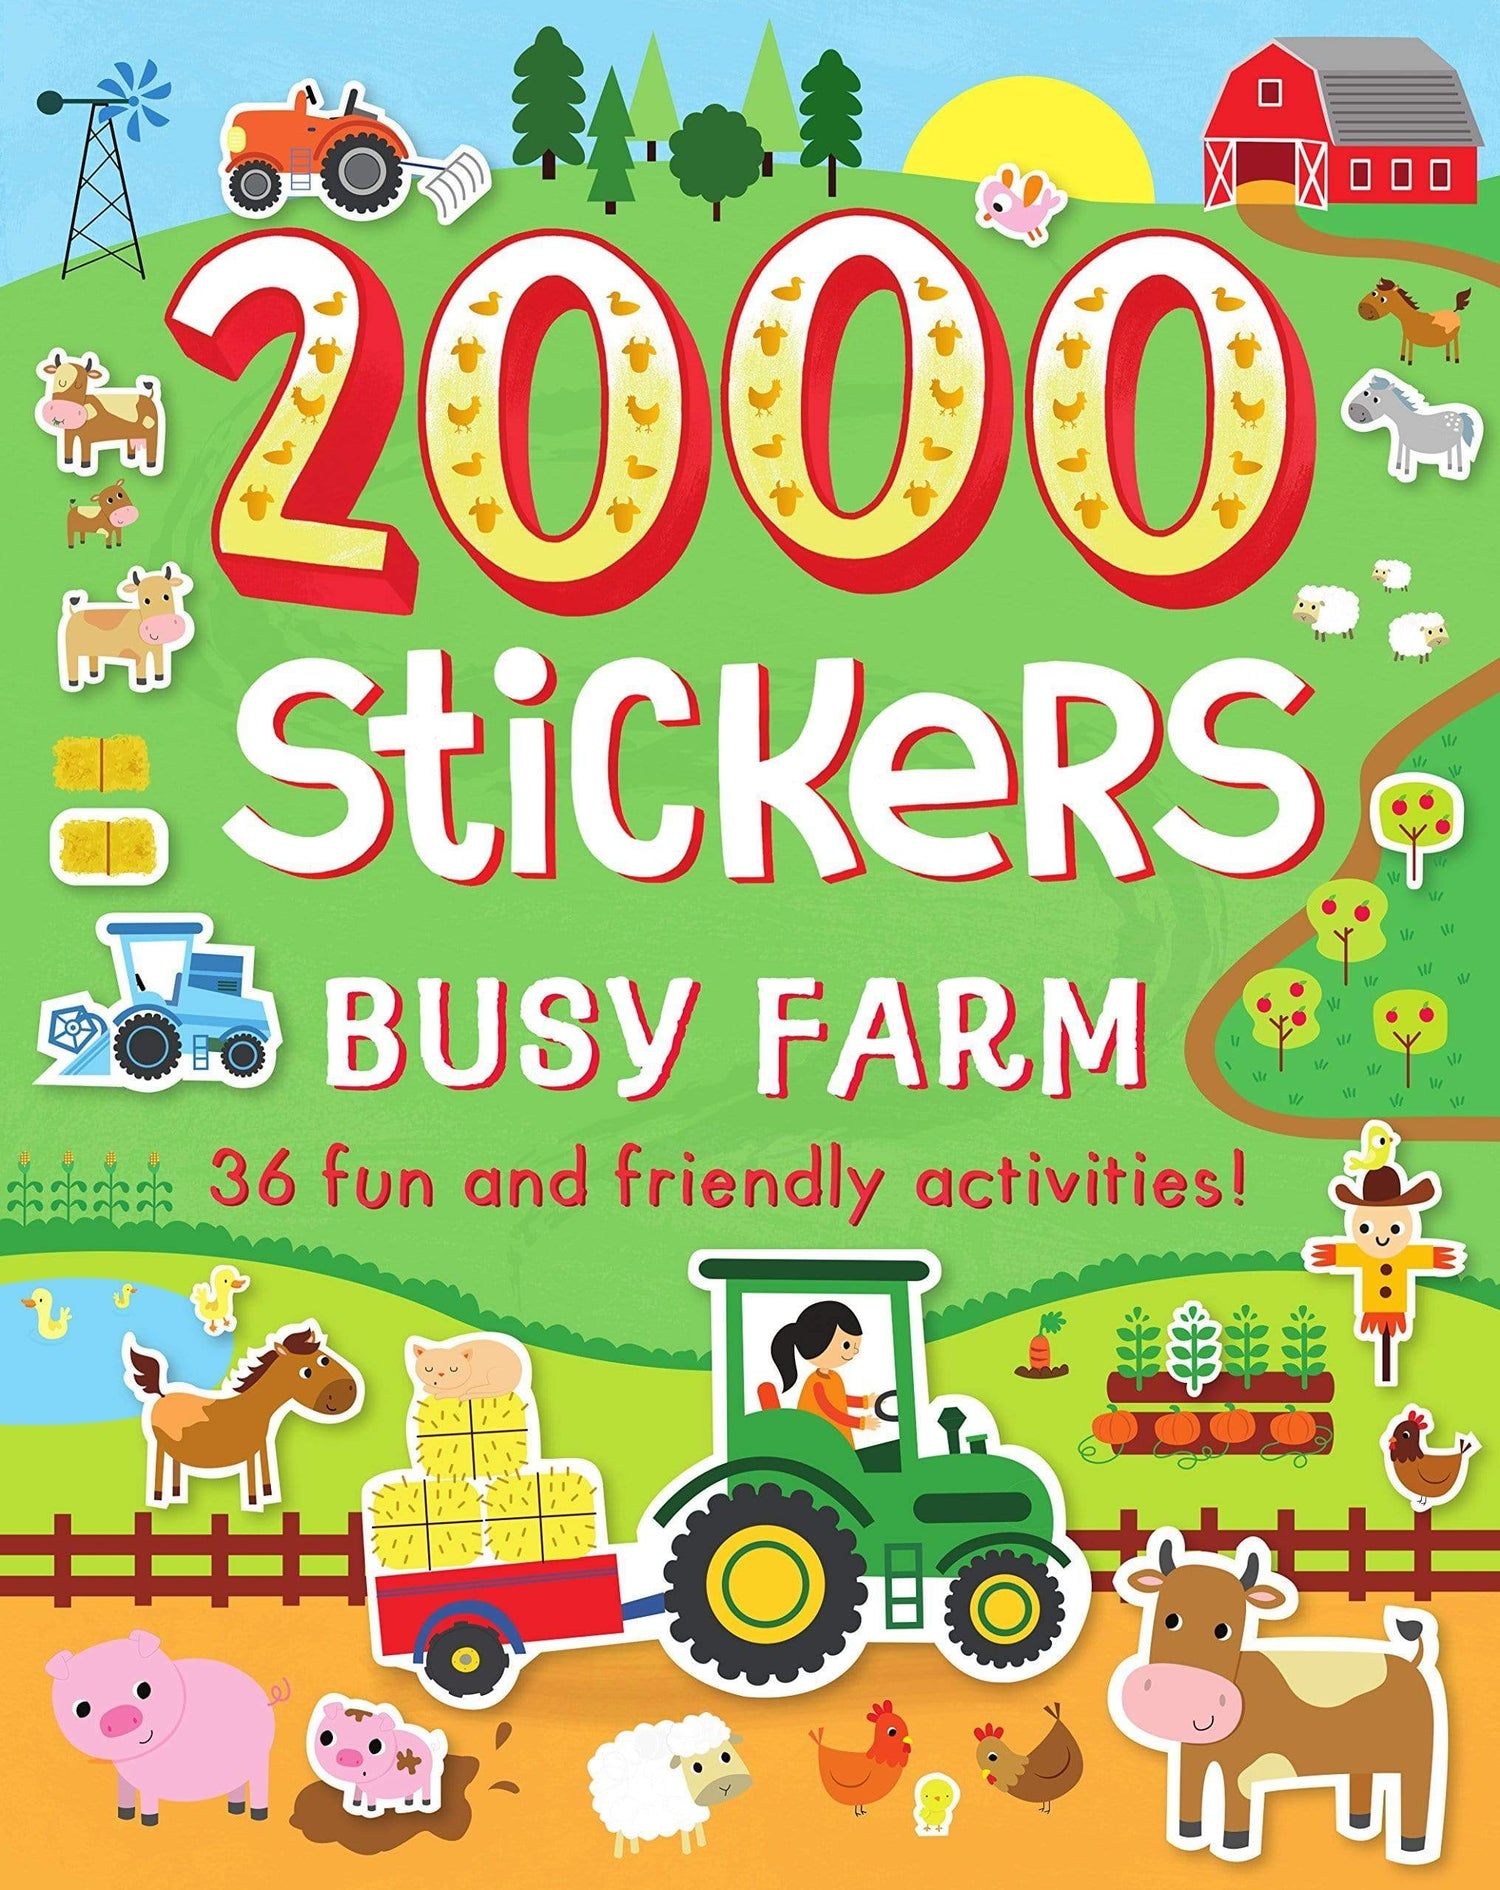 2000 Stickers Busy Farm: 36 Fun And Friendly Activities!